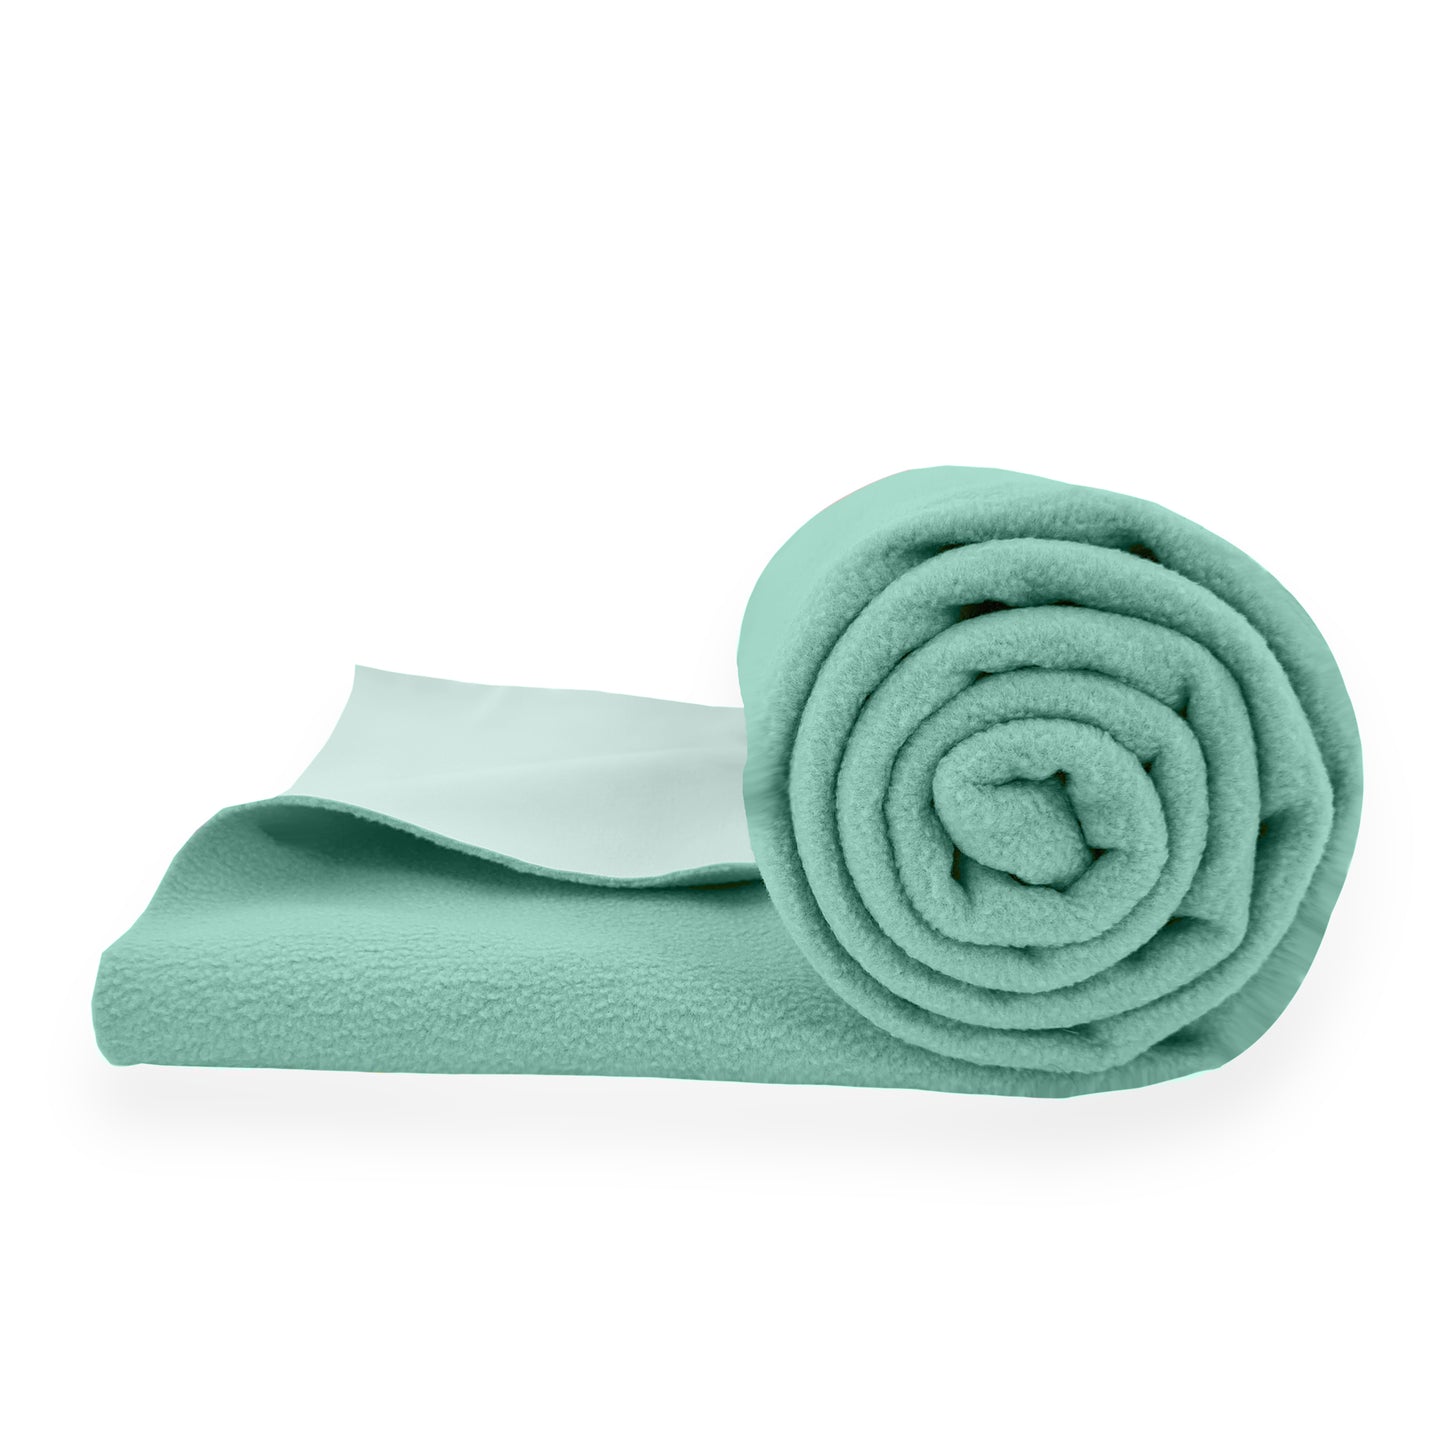 Waterproof Quick Dry Protector Sheet, Baby Bed Protecto (140 X 100 CM), Pack of 1 -SEA GREEN